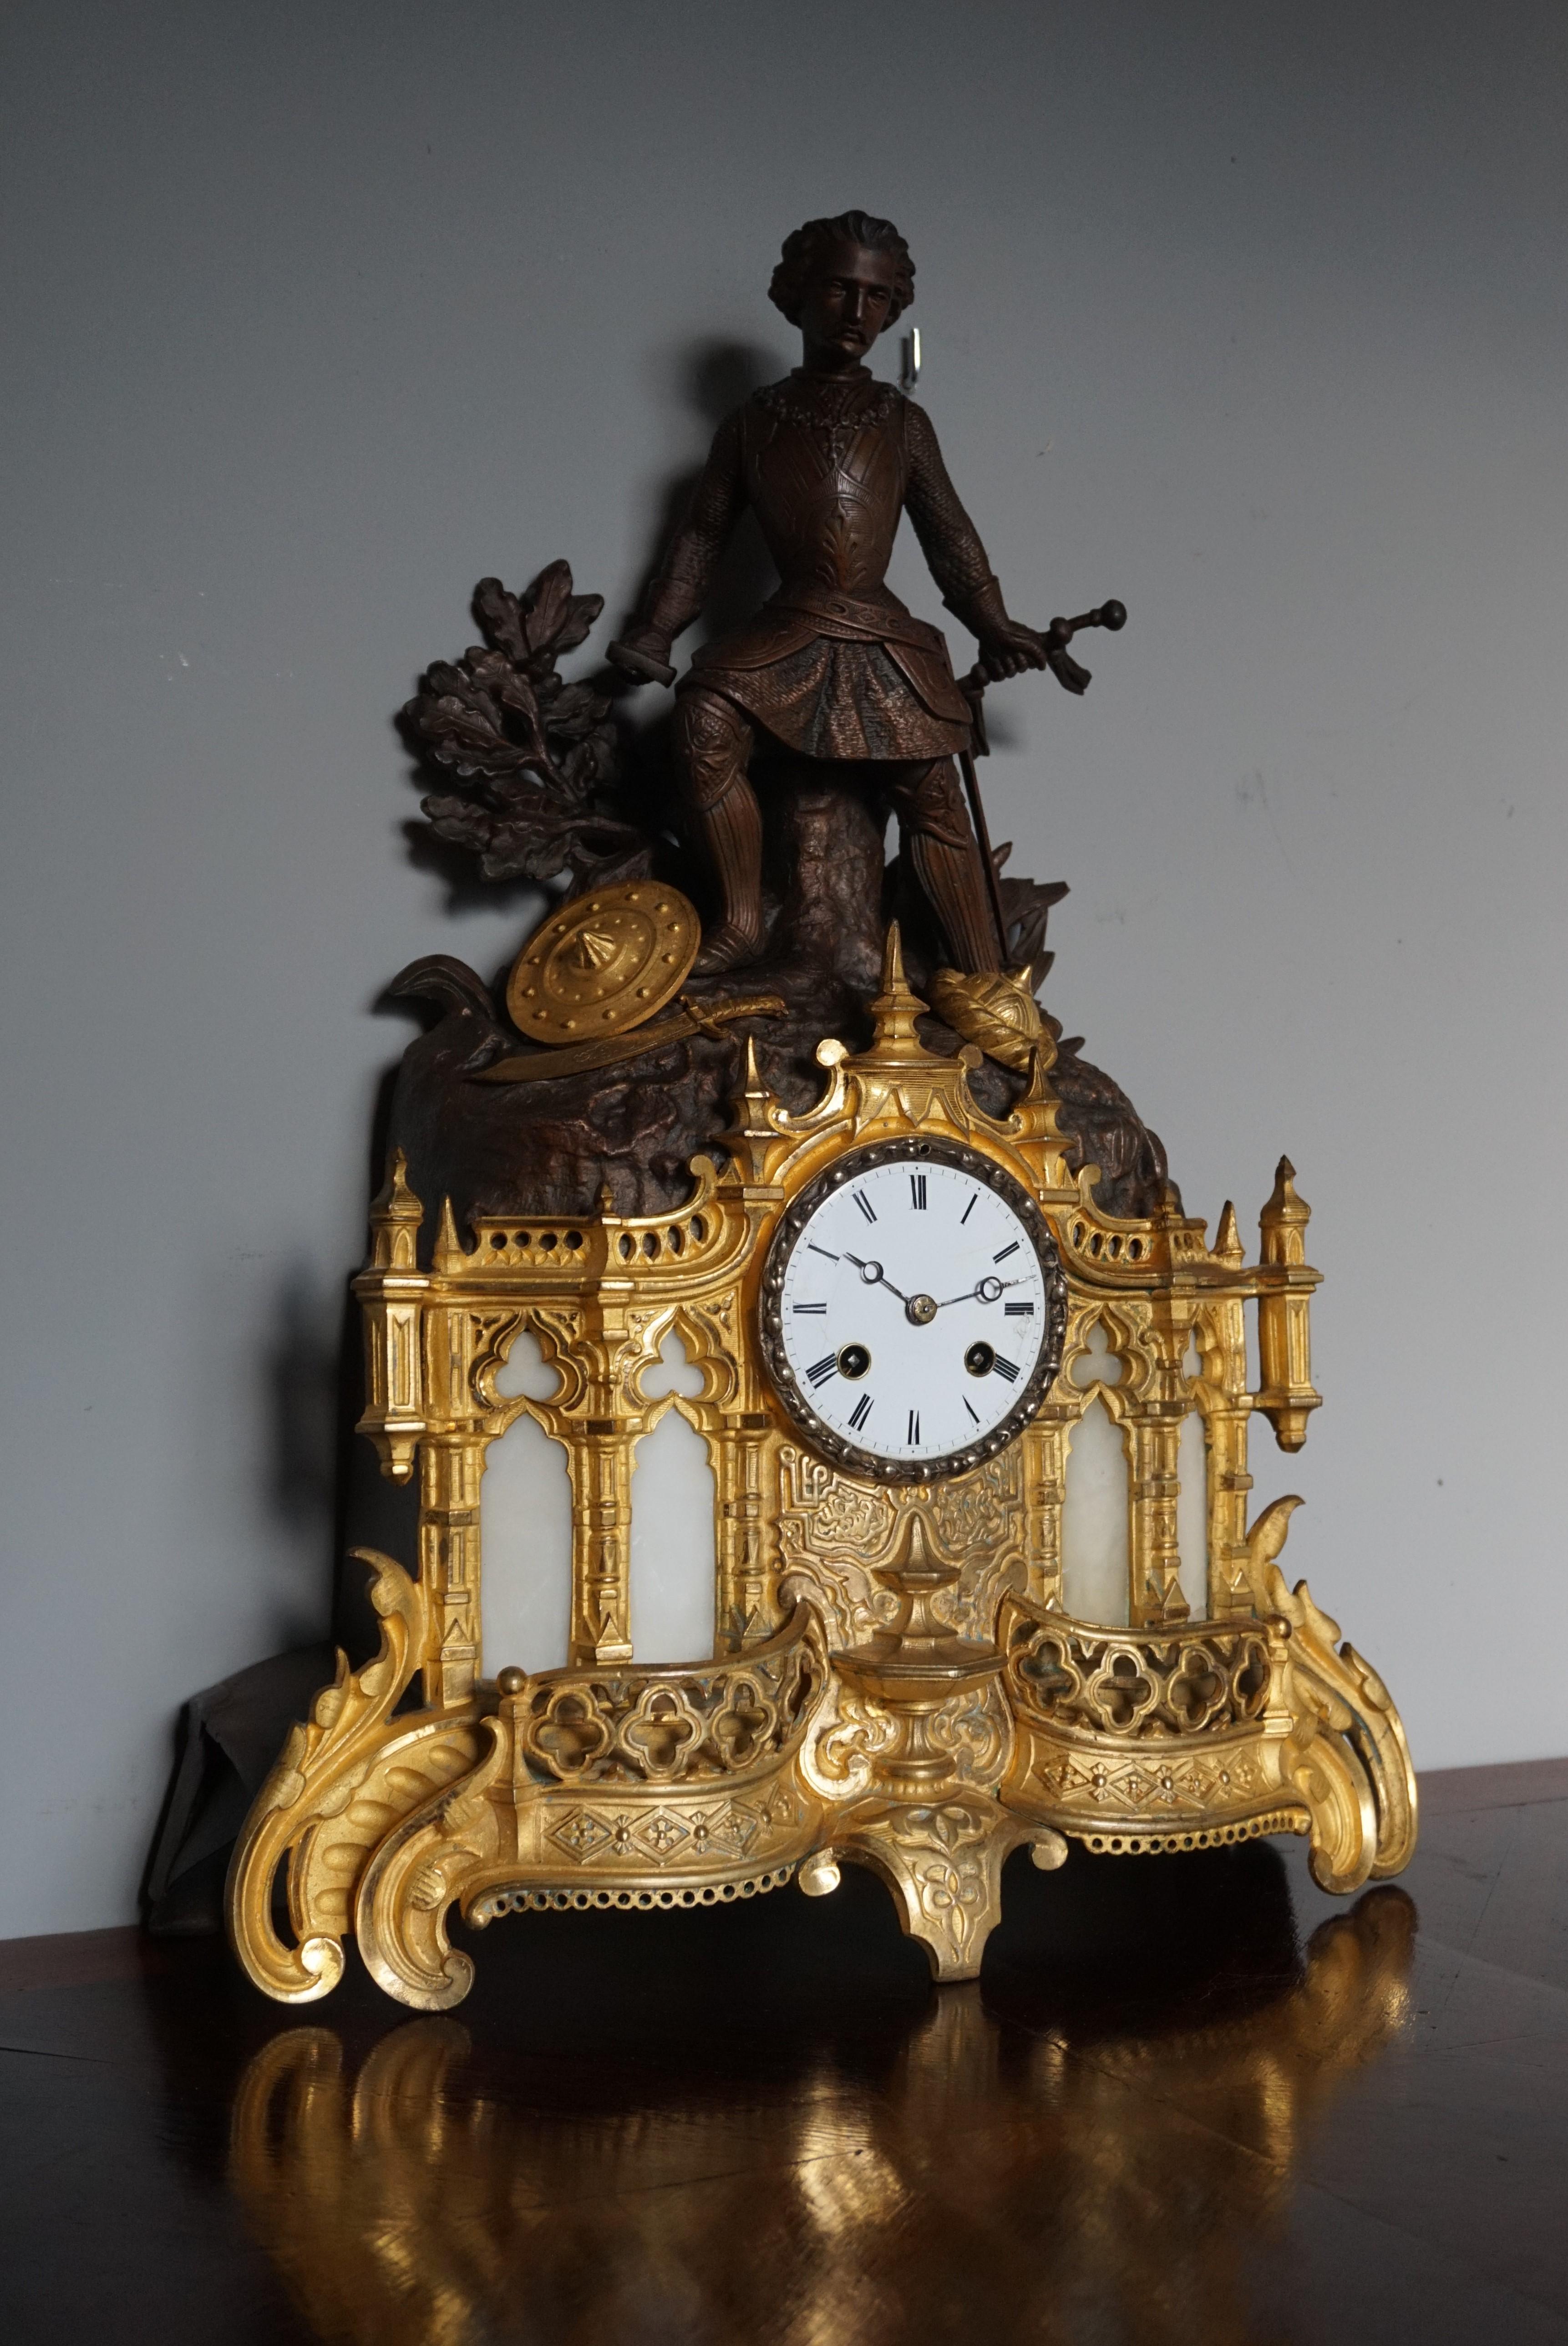 Cathedral design, sculptural gilt bronze and zinc clock.

This sizable, handcrafted, impressive and meaningful clock comes with a variety of Gothic church elements. As a matter of fact, the bottom half of this mantle clock very much resembles the